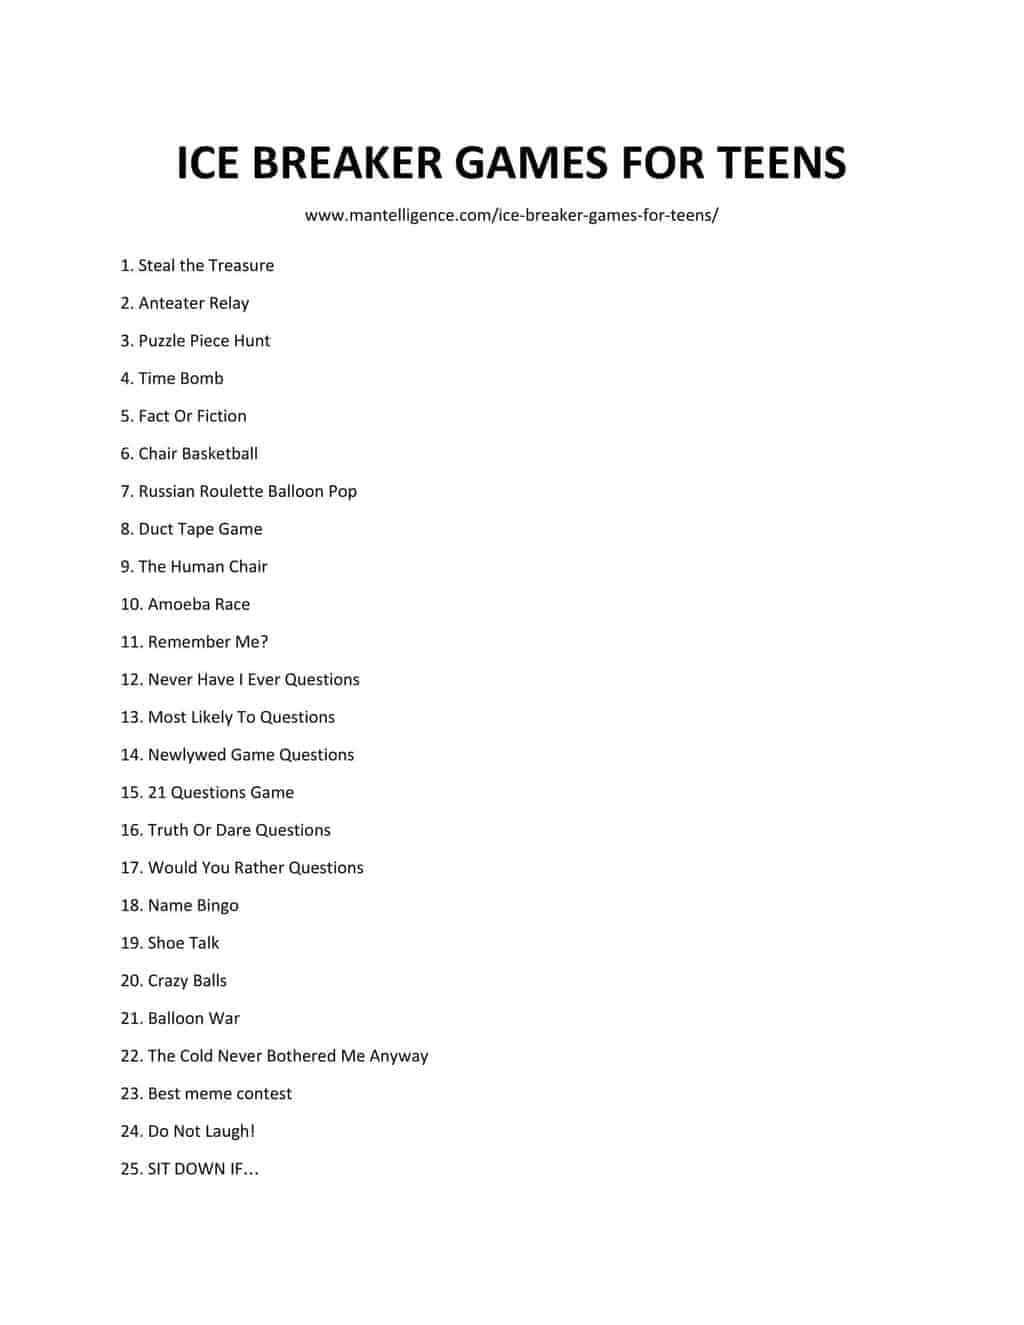 Cool Names For Games For Teens